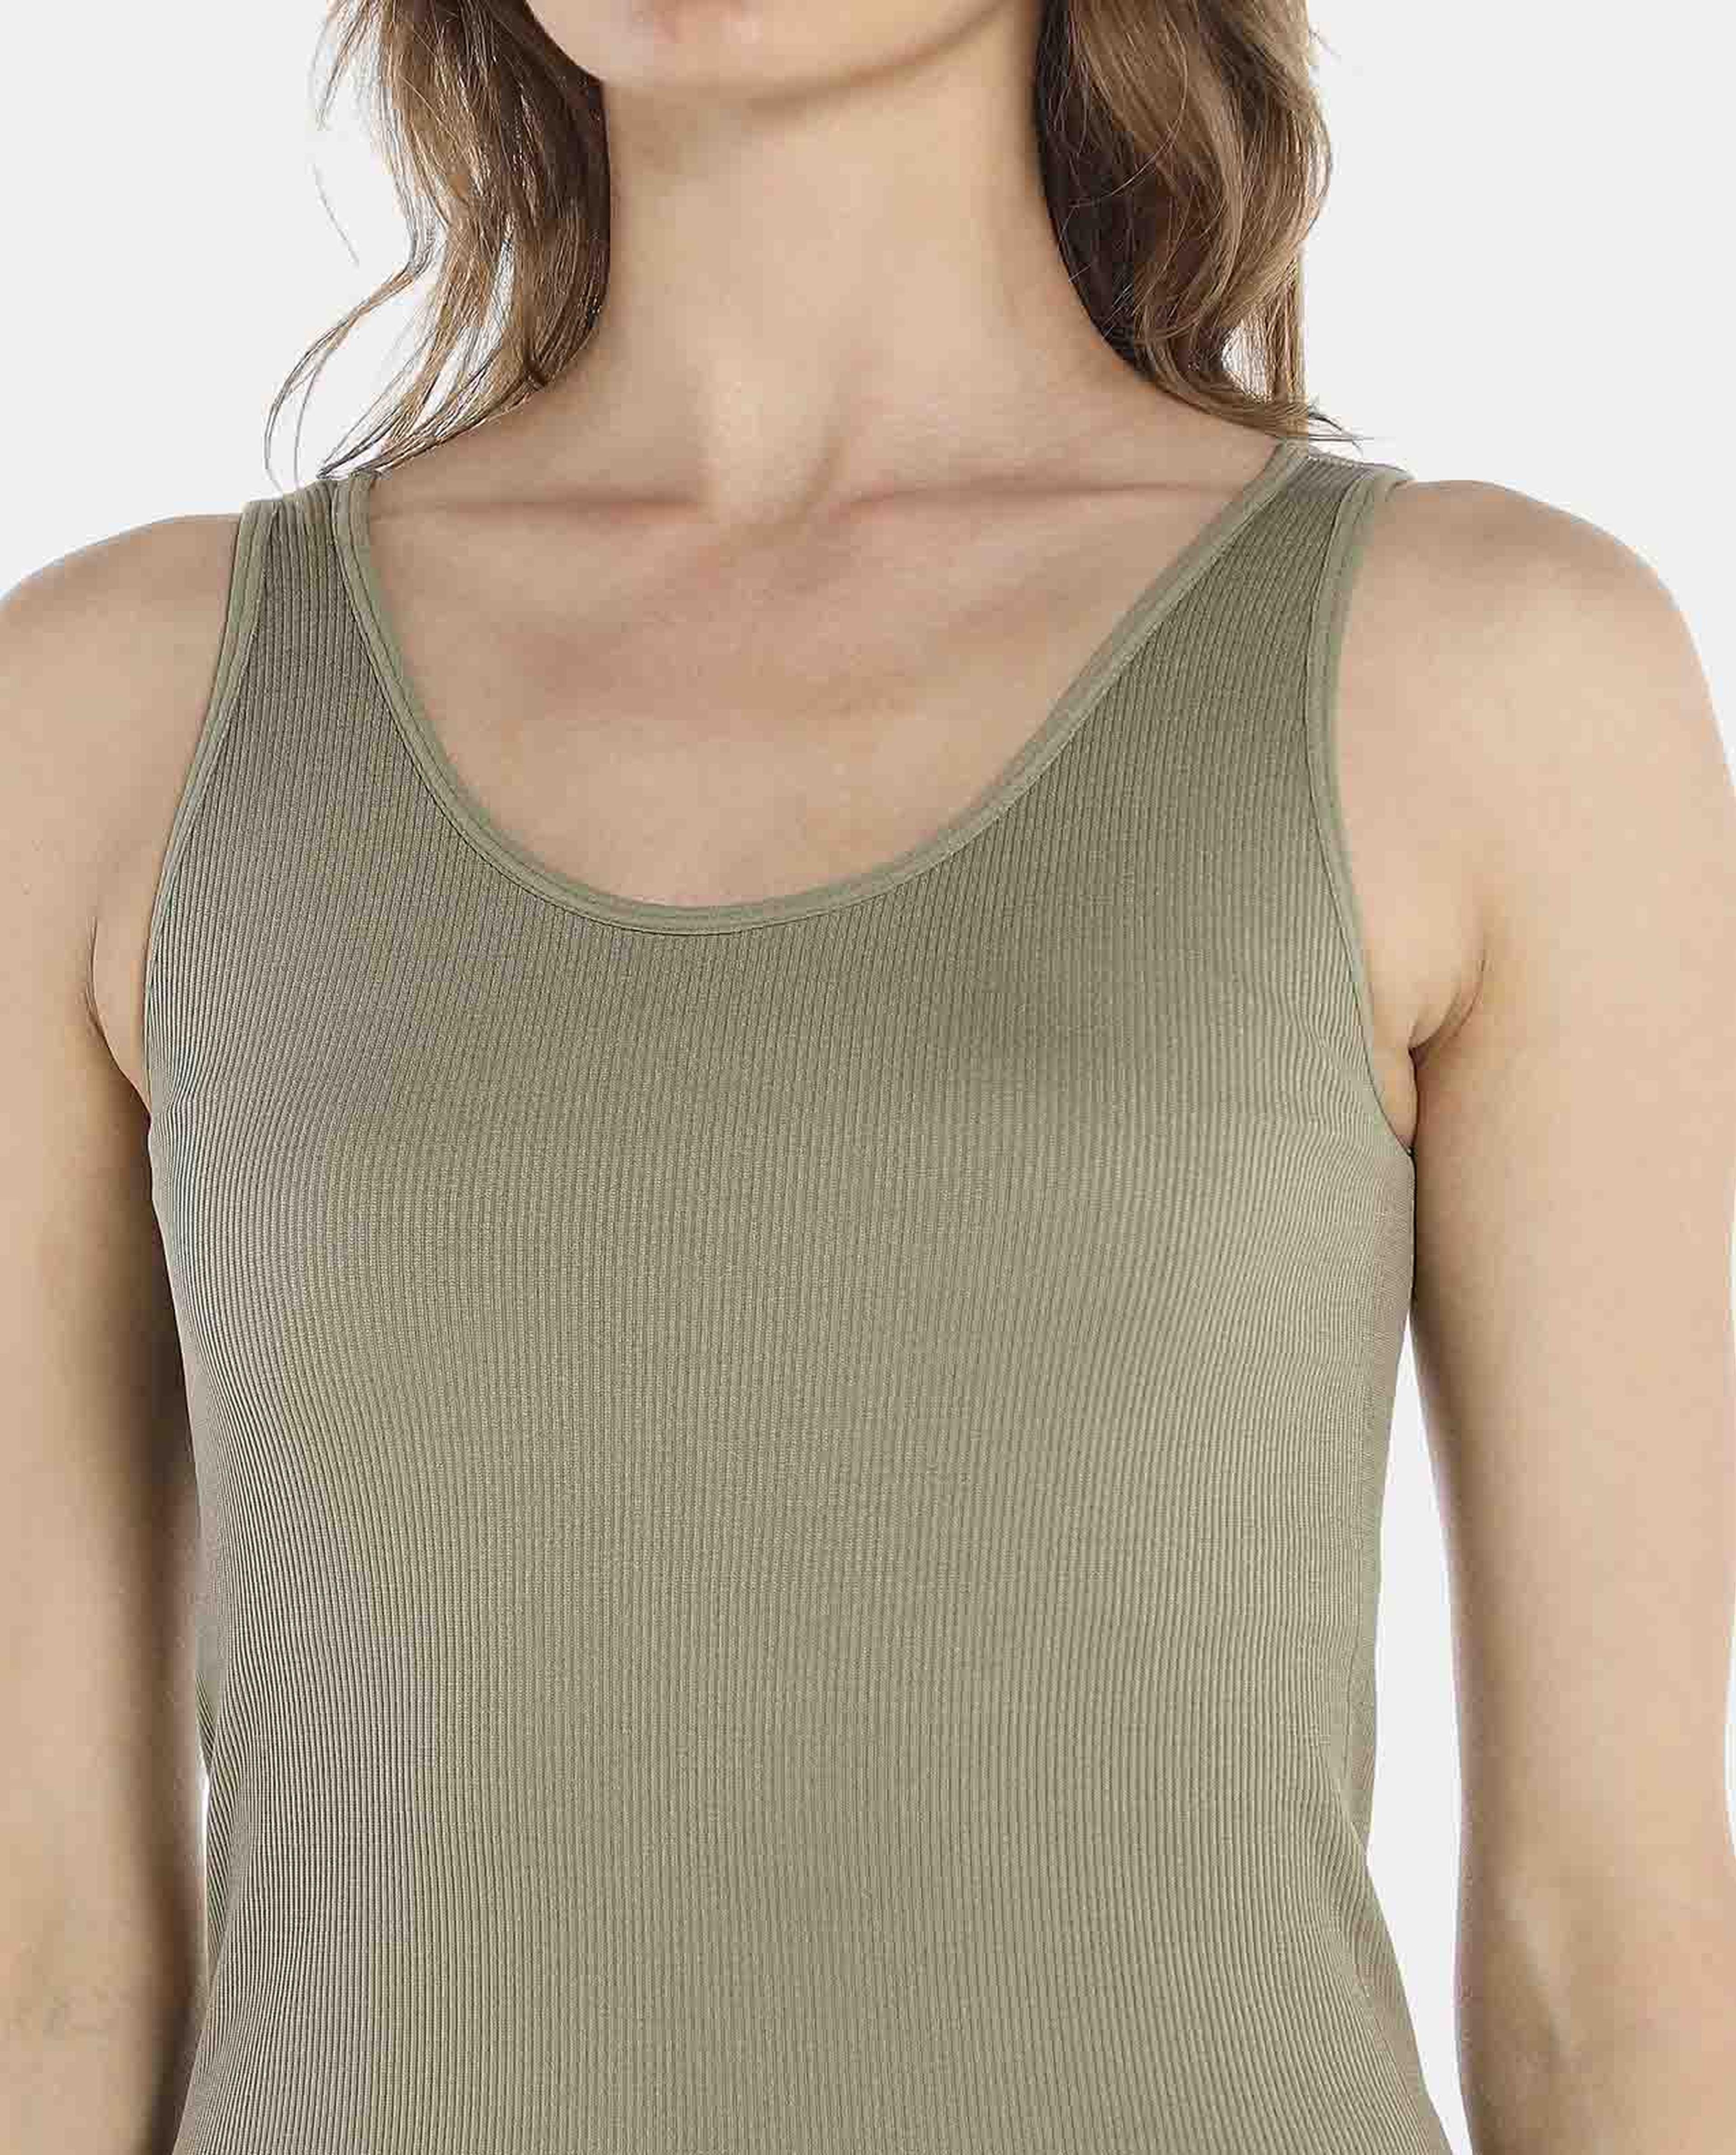 Olive Tank Top